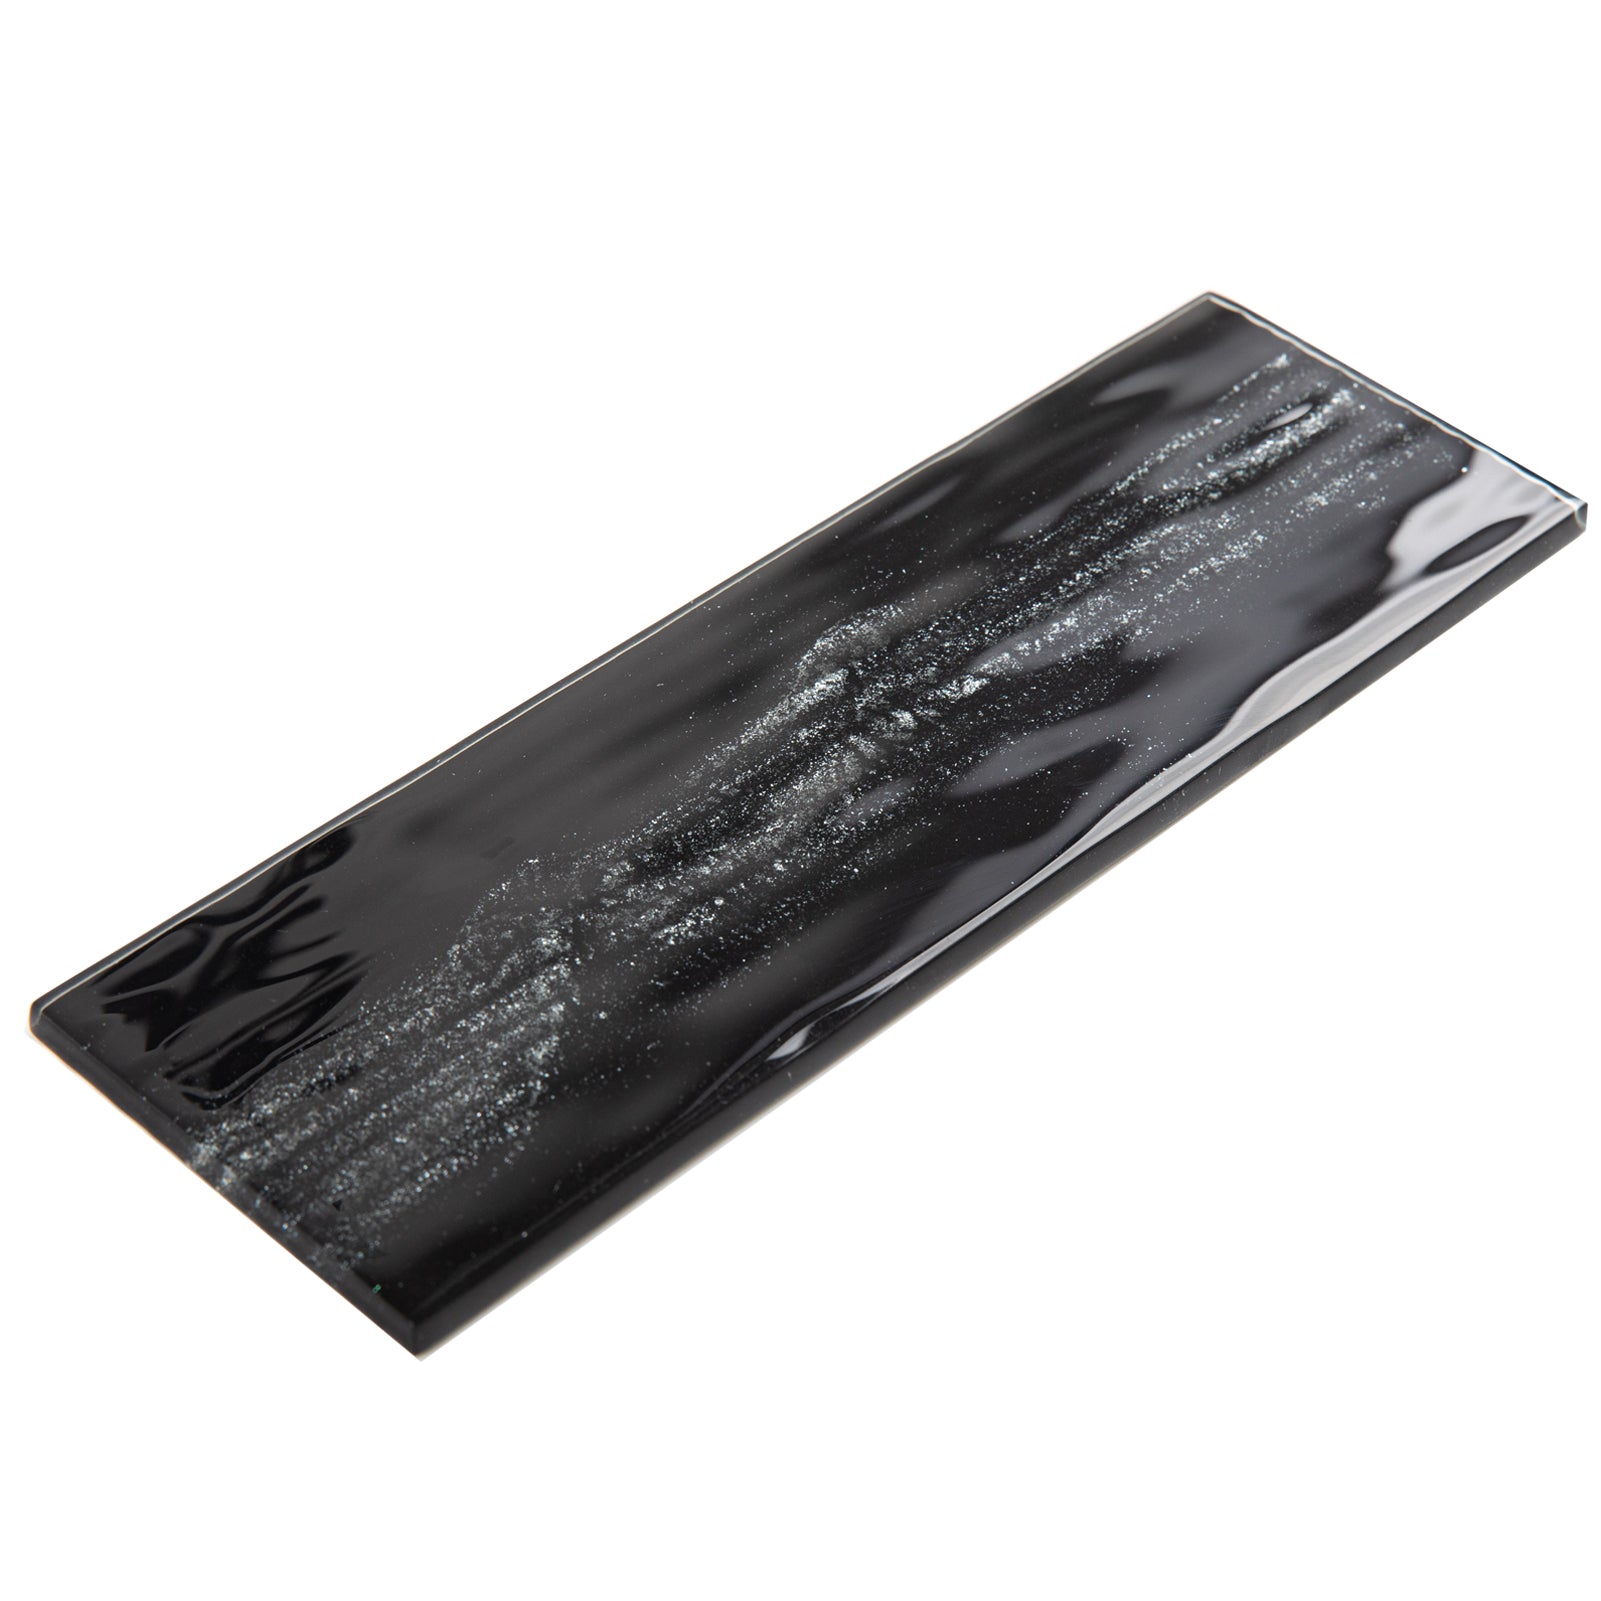 Glass Subway Tiles, Black, 3x10 Inch, Glossy, Textured, Sparkling Surface